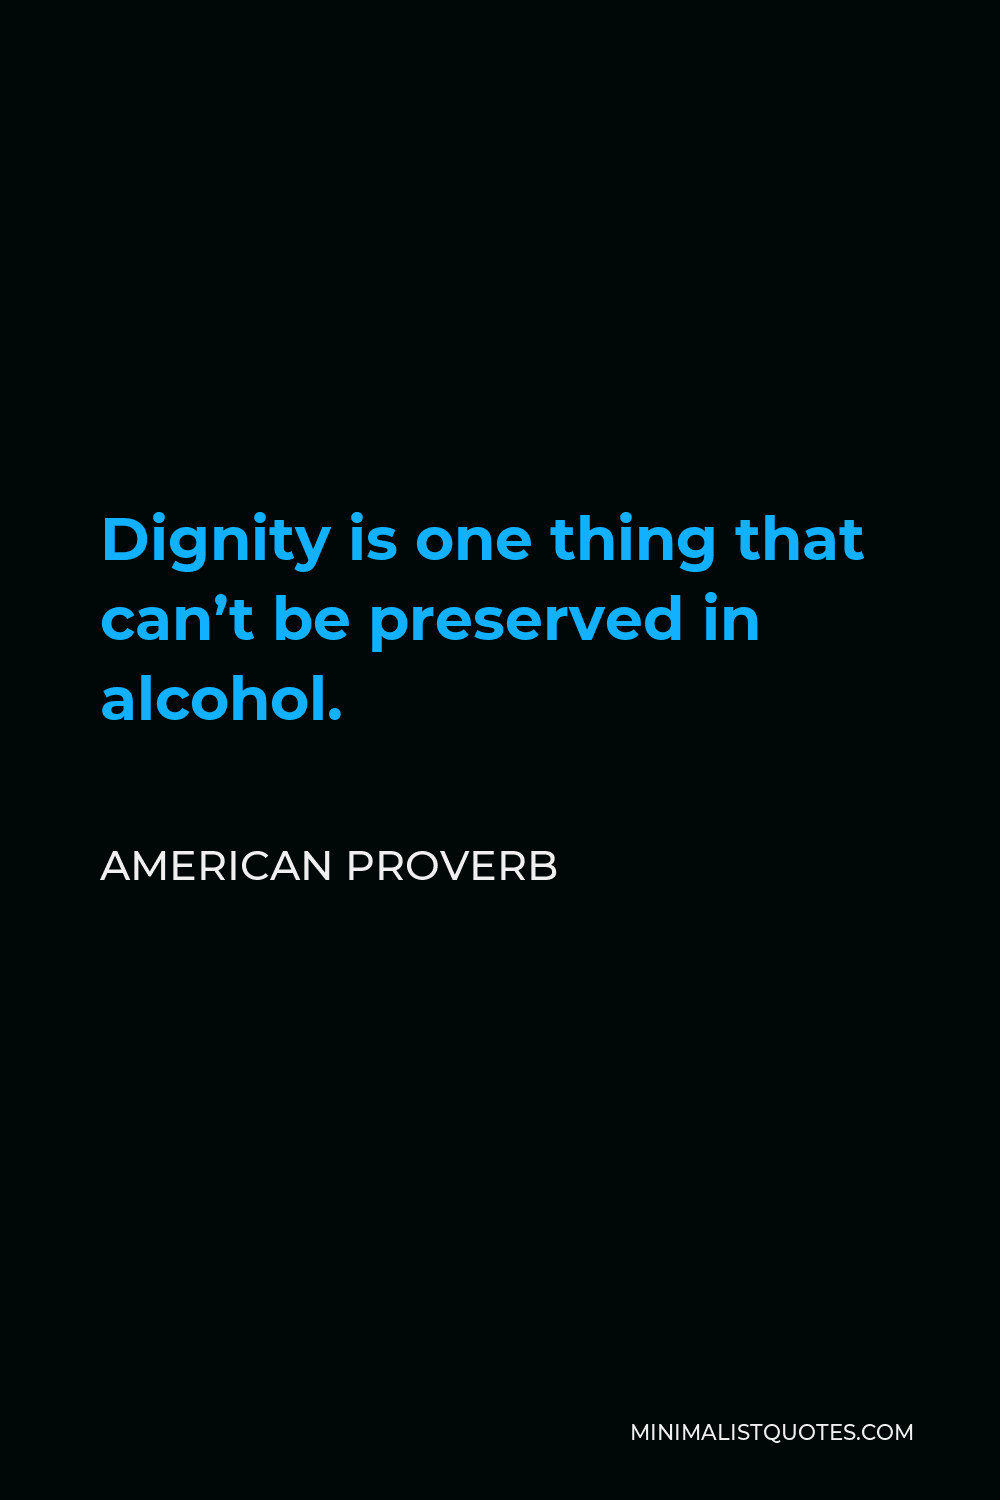 American Proverb Quote - Dignity is one thing that can’t be preserved in alcohol.